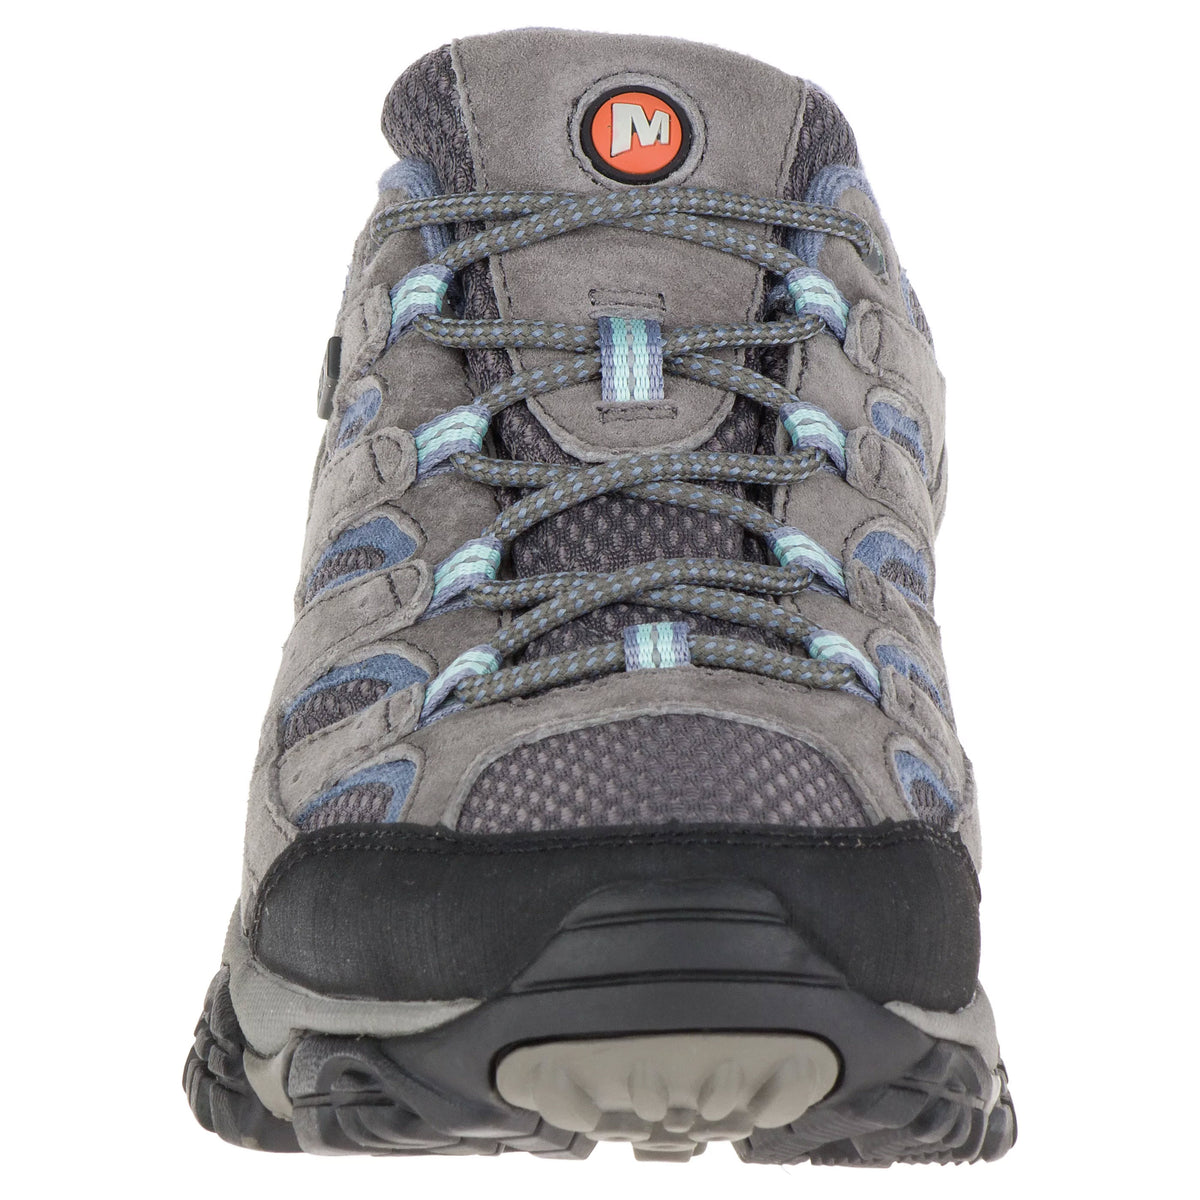 Front view of a Merrell Moab 2 Granite - Womens hiking boot with laces and a visible logo on the tongue.